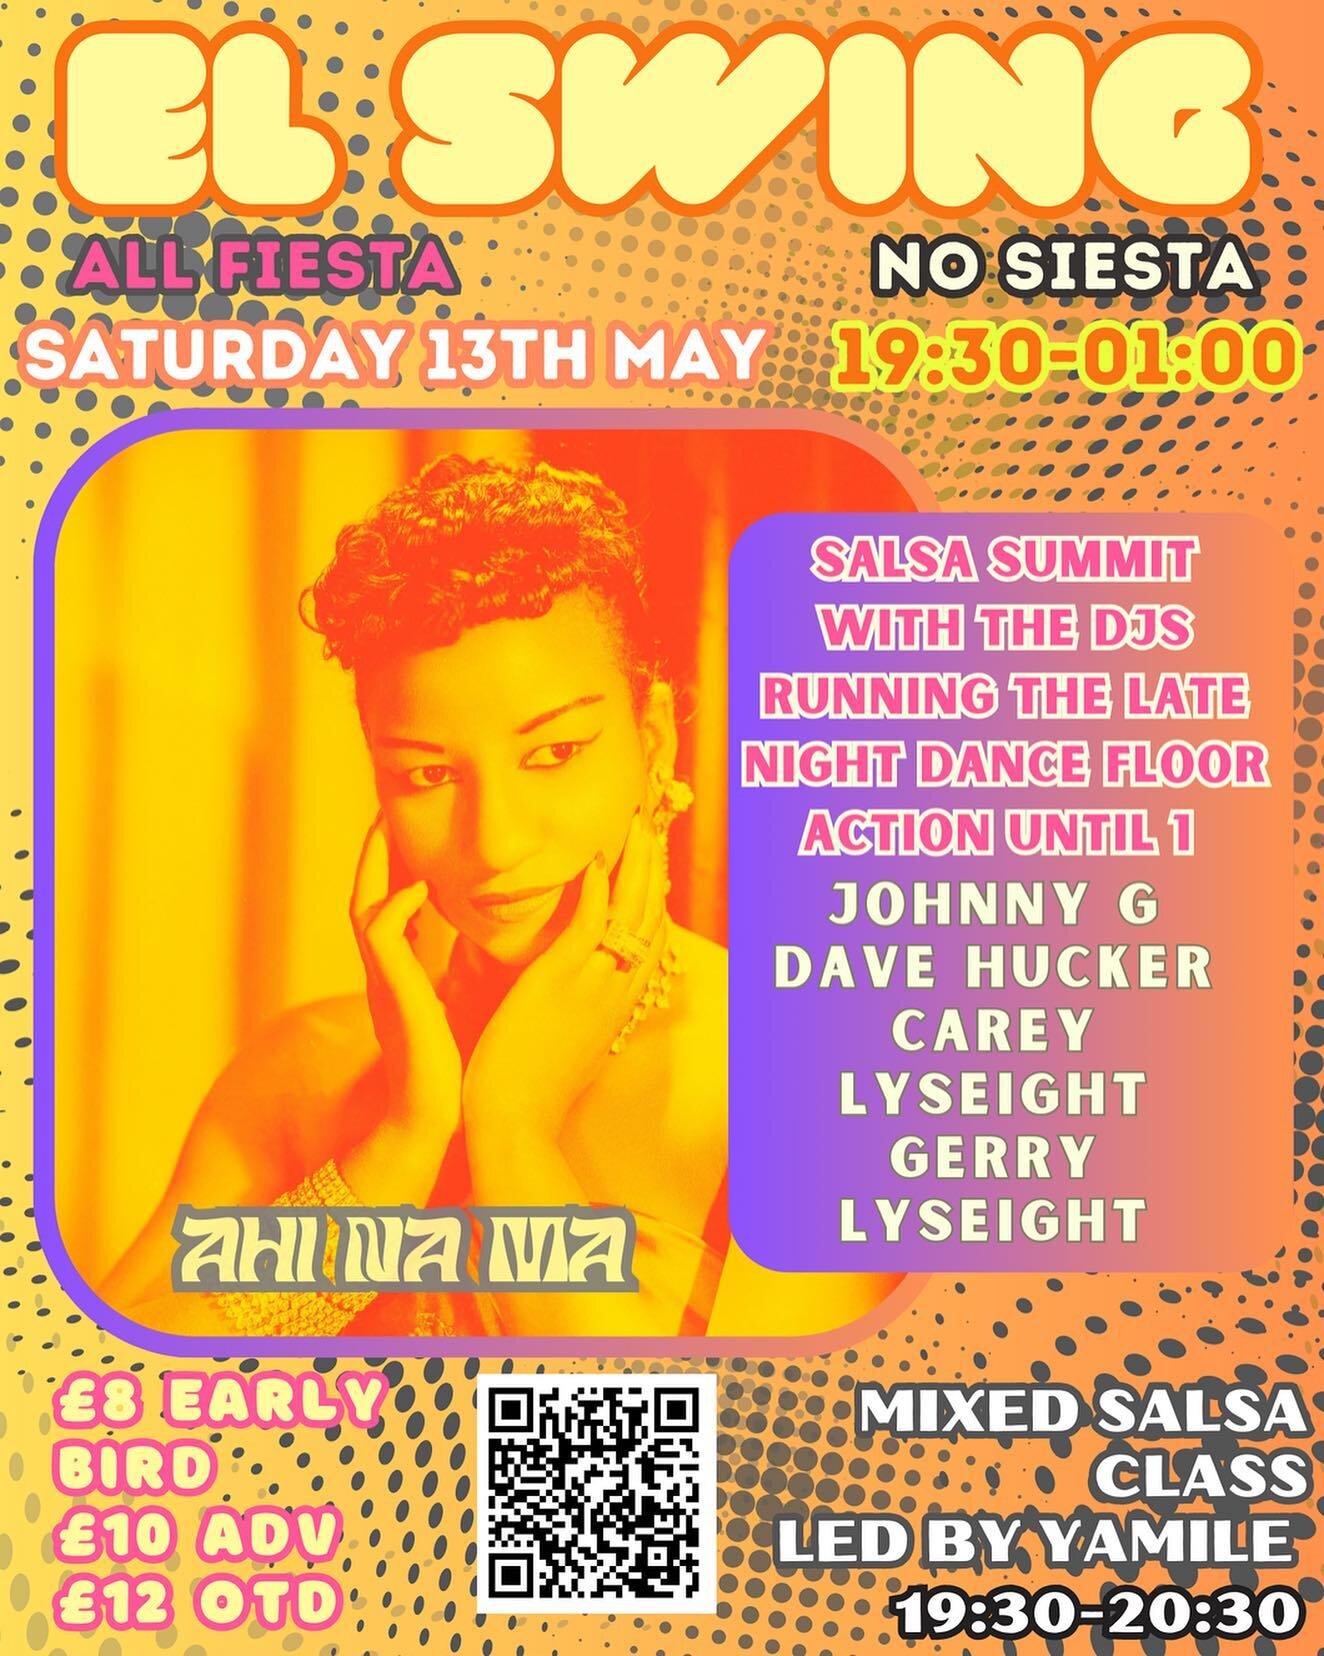 El Swing Salsa 🥁 This Saturday!! 13th May

19:30 - 20:30 Salsa Class 
20:30 - 00:00 DJs &amp; Dancing 💃🏽 

Grab a ticket through the link in our bio. All levels welcome! 

#londonsalsa #elswing #westnorwoodevents #community #salsadancing